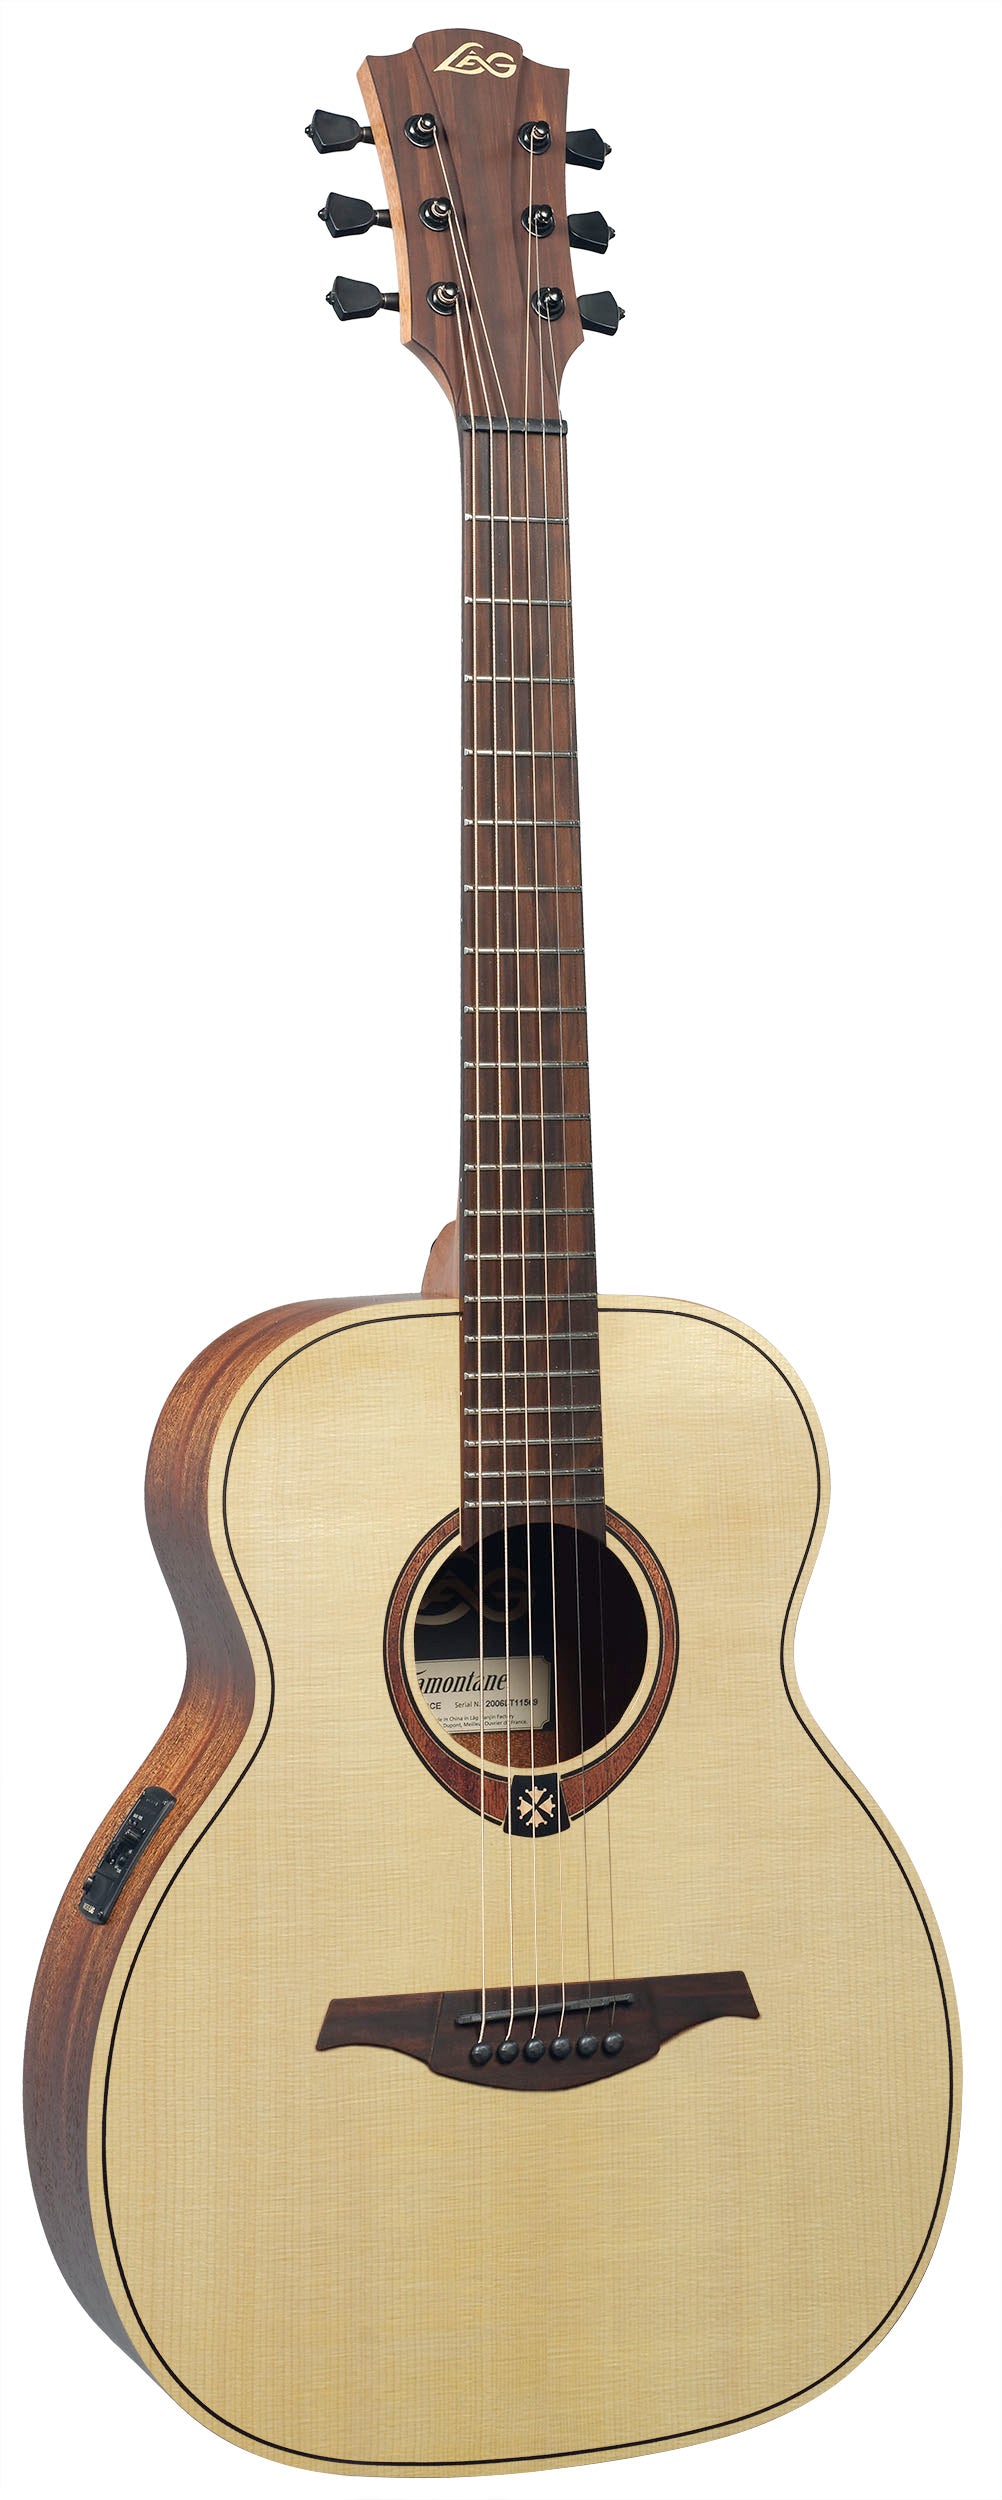 Lâg TRAVEL-SPE Tramontane Acoustic-Electric Guitar, Natural Spruce